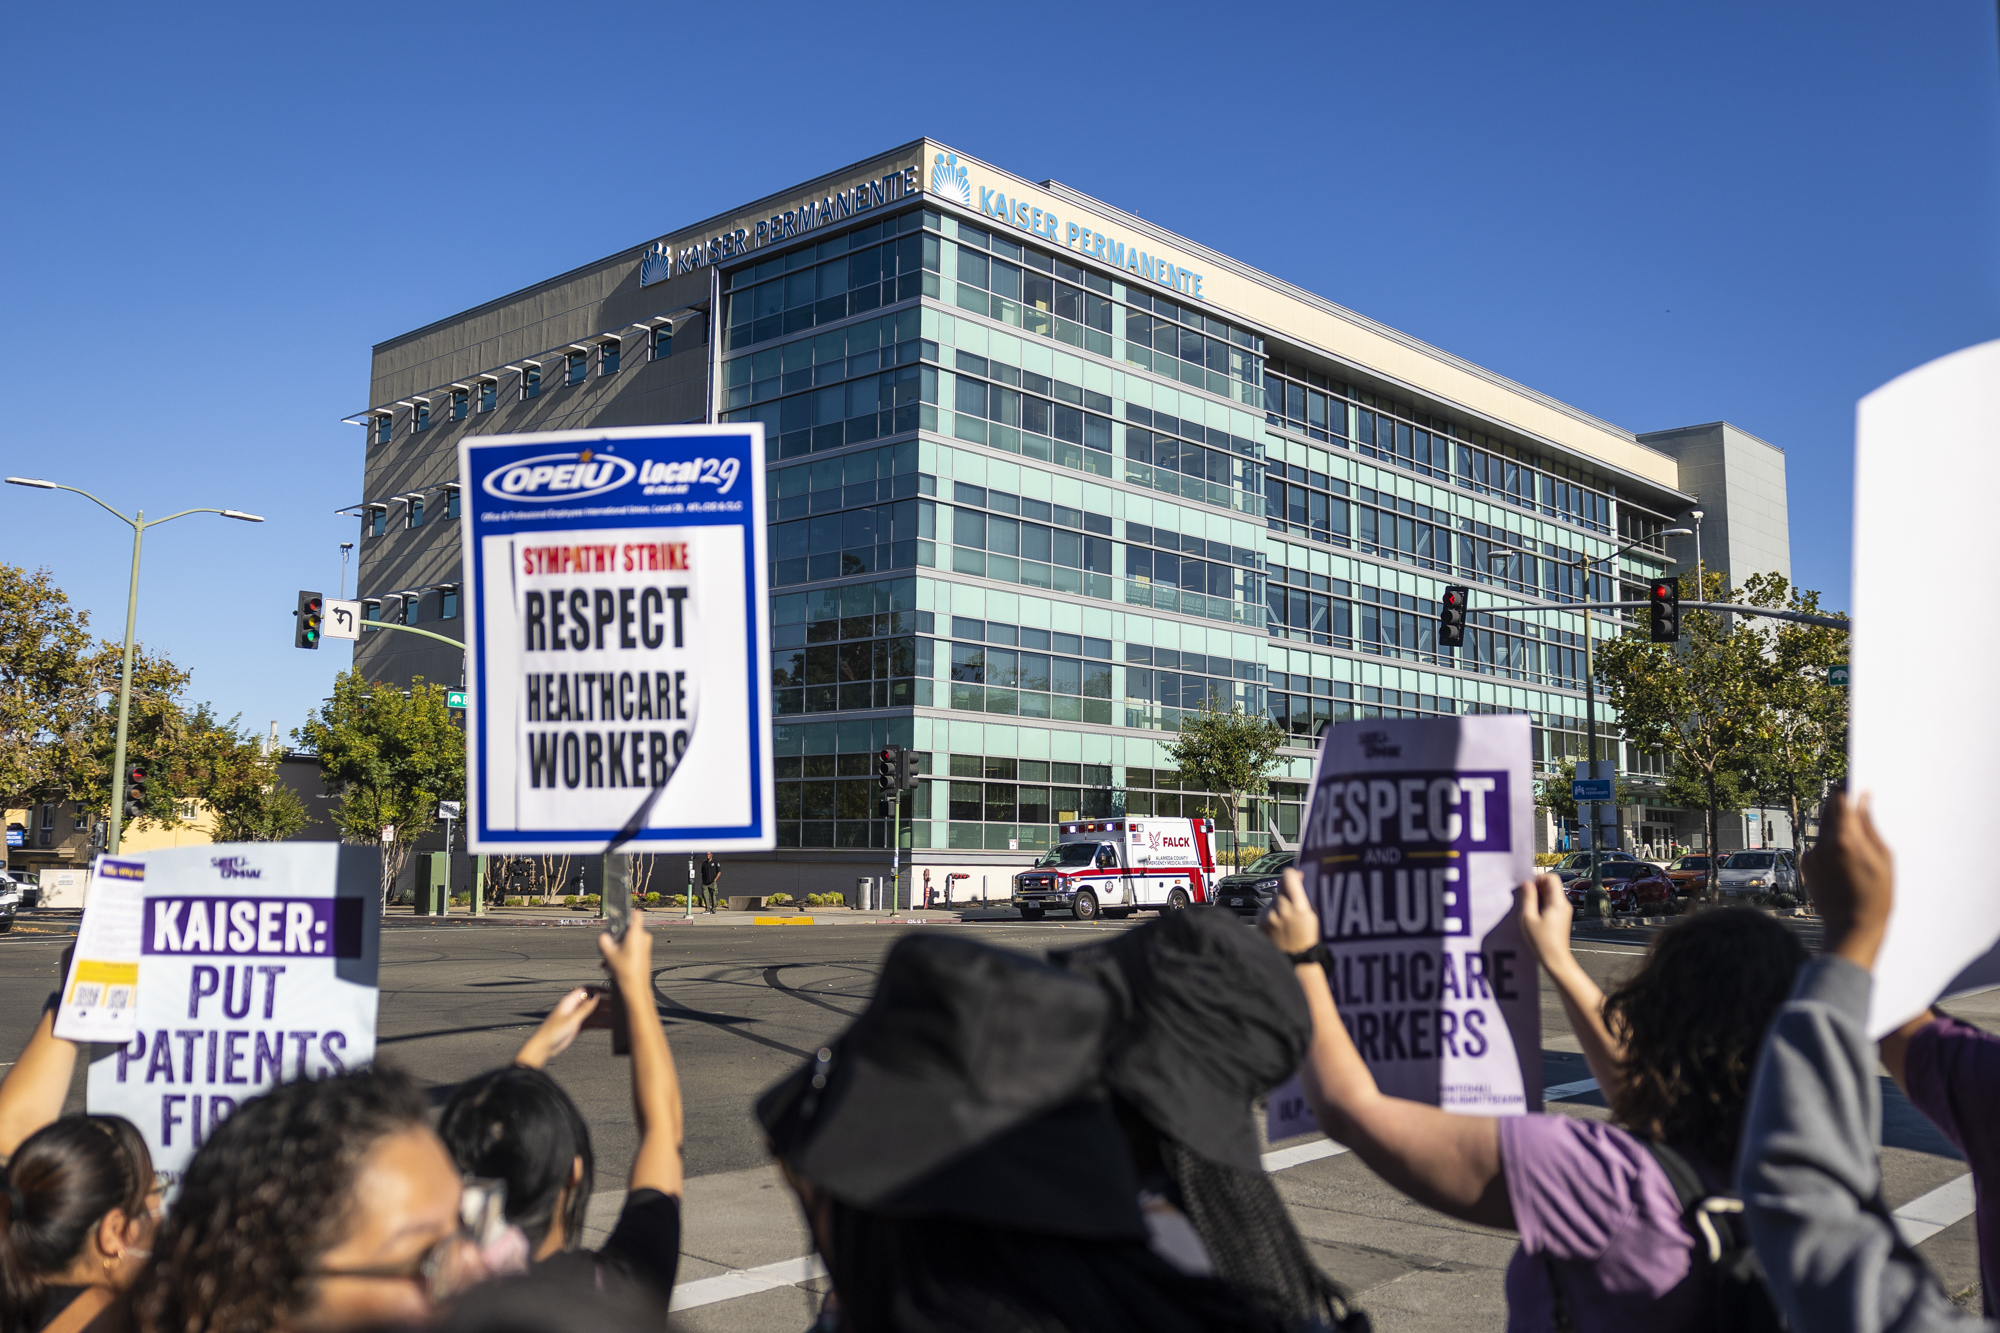 A group of people hold signs in front of a large modern looking building.